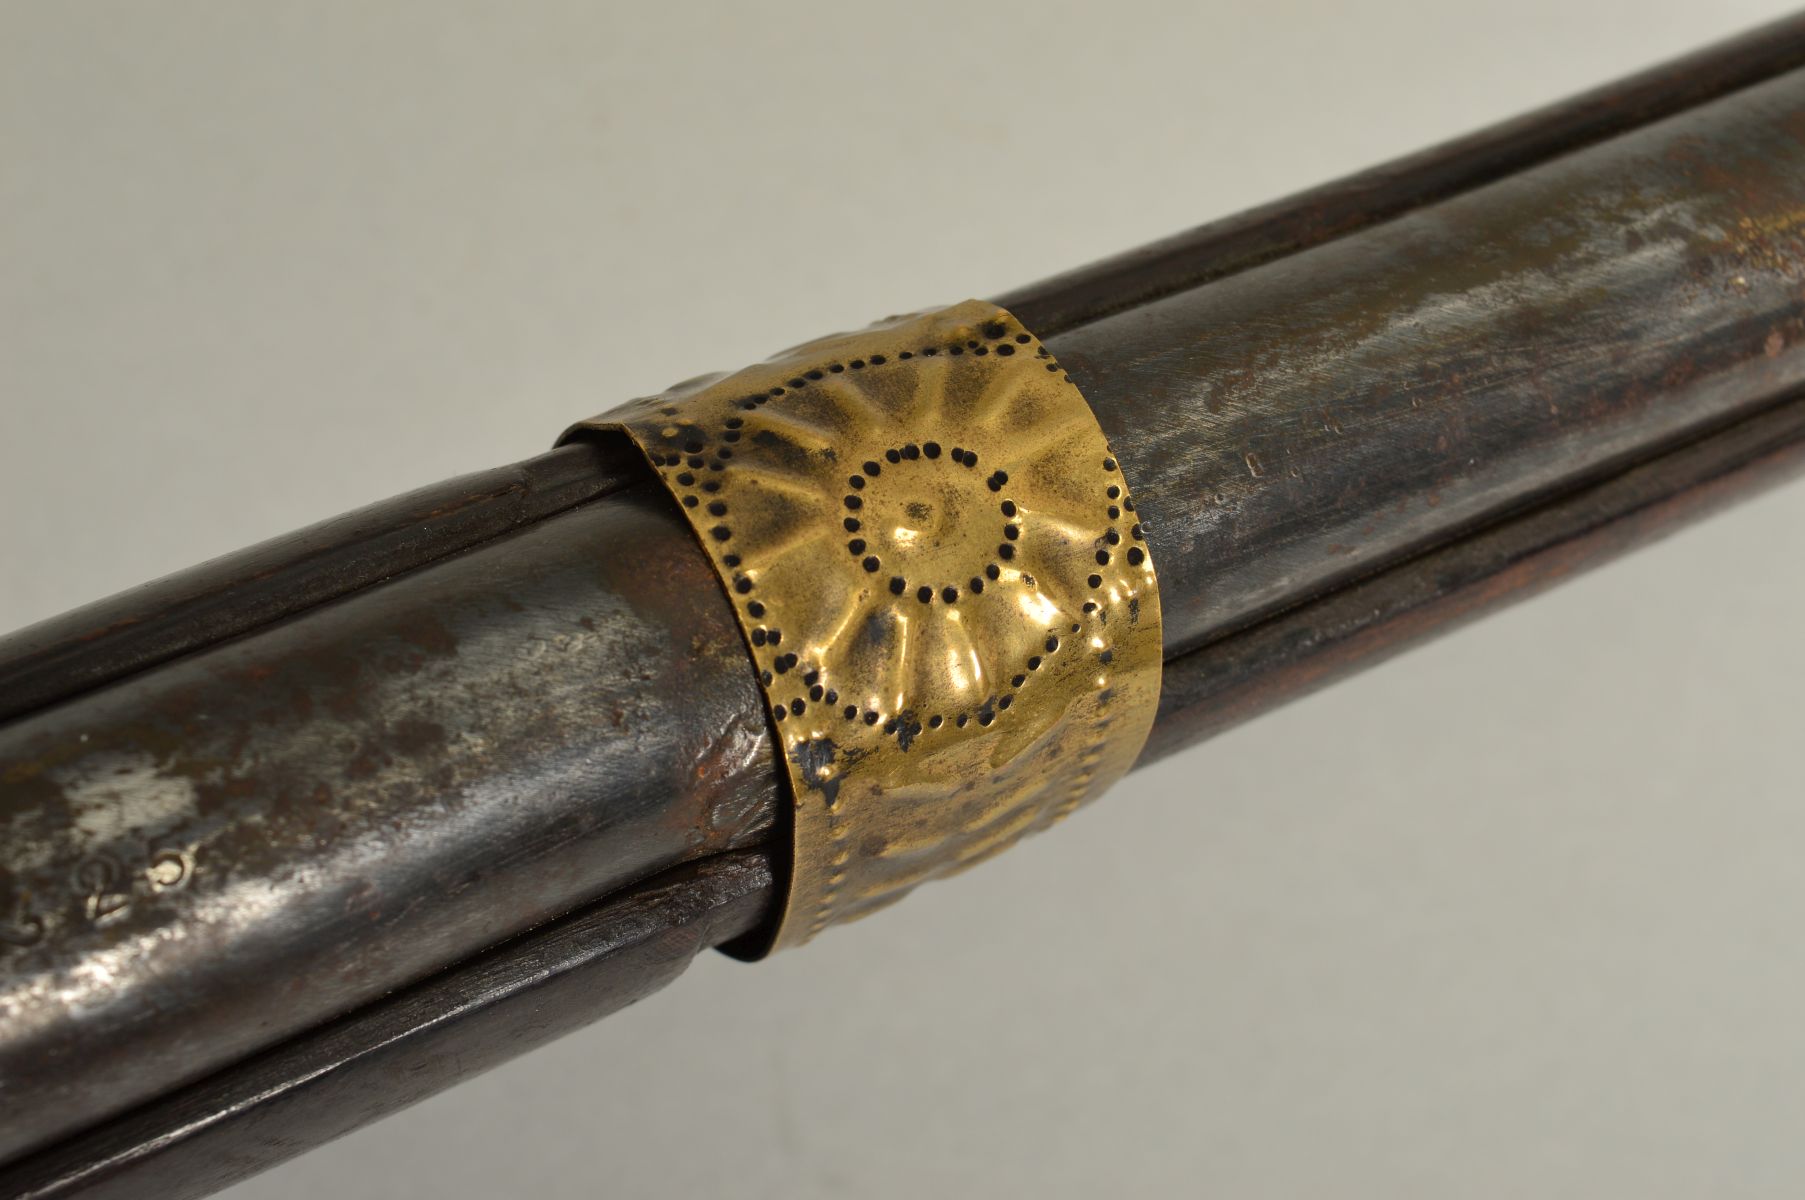 A 15 BORE 2 BAND PERCUSSION SINGLE BARREL MILITARY PATTERN MUSKET, the lock lacks the normal arsenal - Image 6 of 6